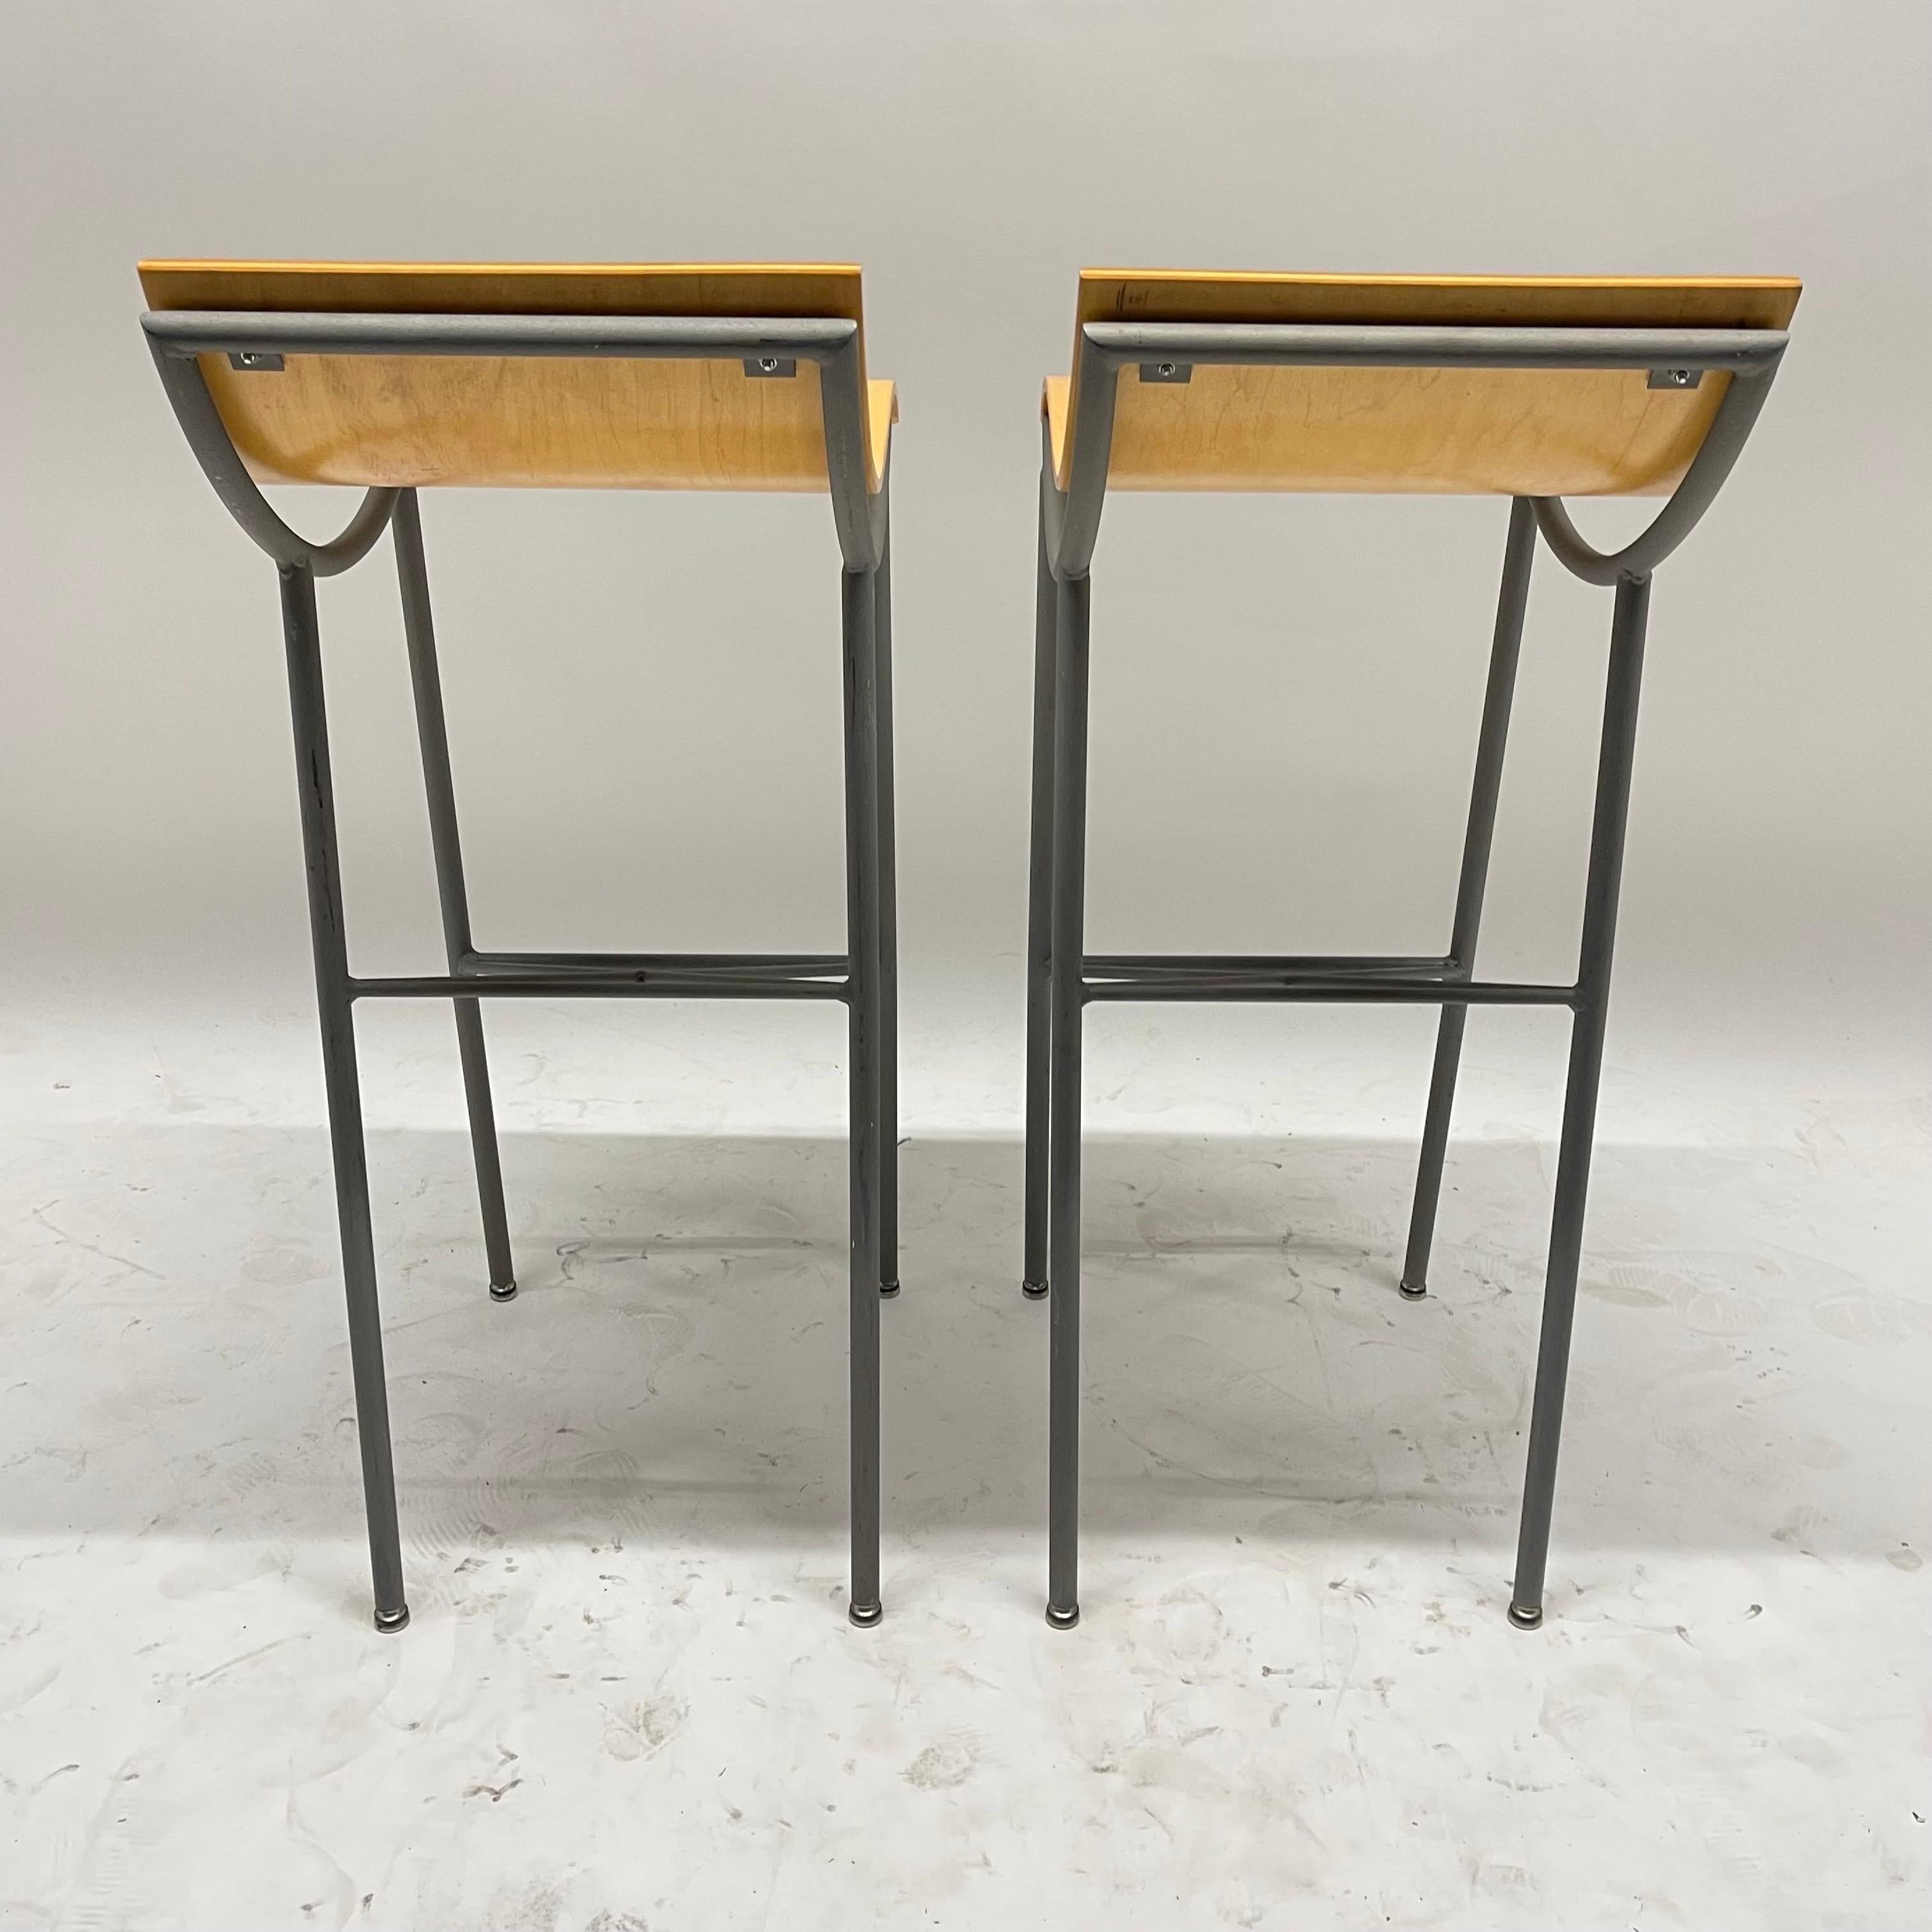 Pair of Post Modern Sculptural Steel and Bent Plywood Bar Stools, circa 1980s In Good Condition For Sale In Miami, FL